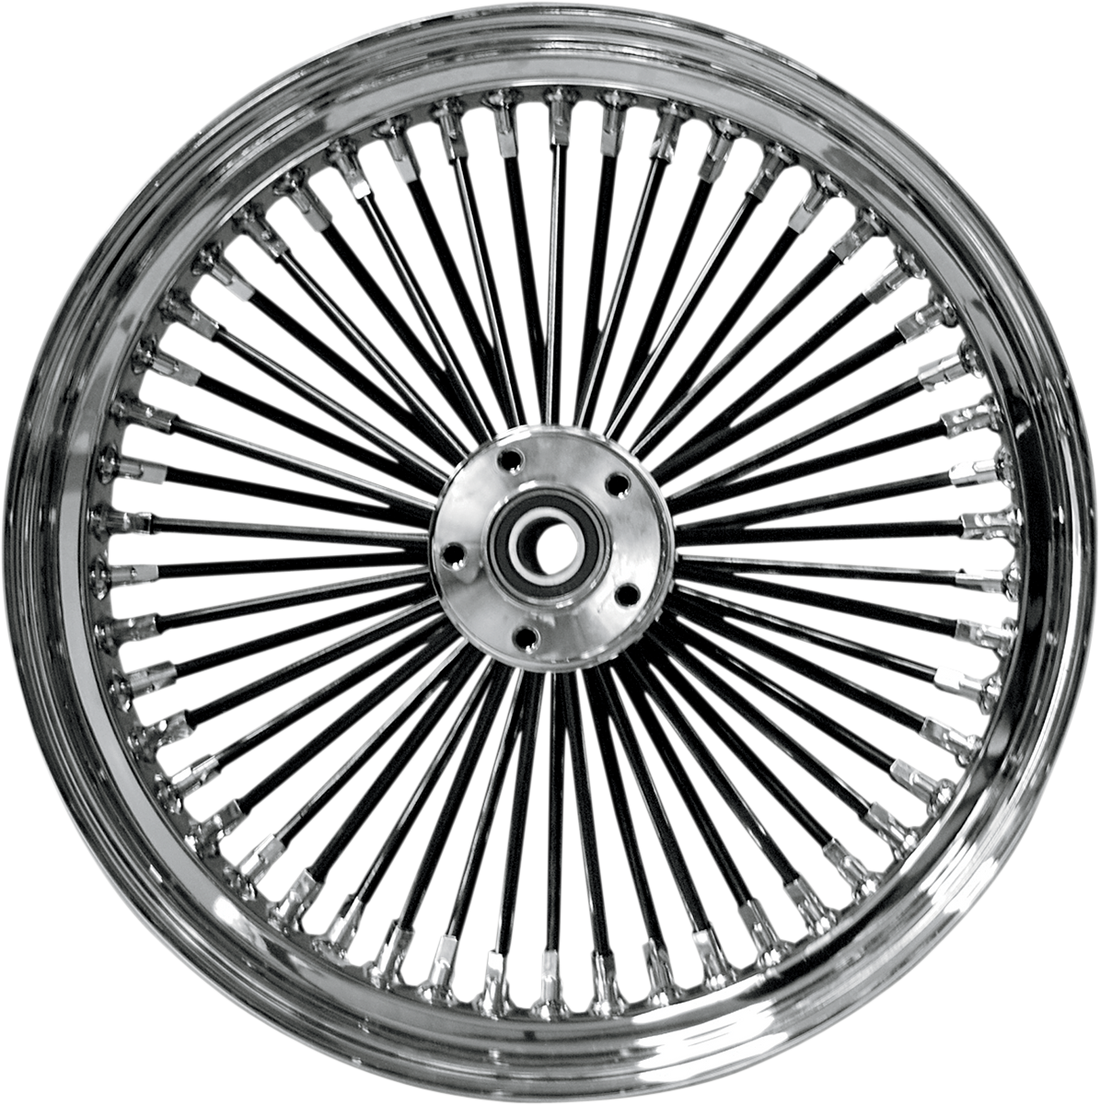 DRAG SPECIALTIES Rear Wheel - Single Disc/No ABS - Black Chrome - 16"x3.50" - '99 FXDWG 04635-1506BS